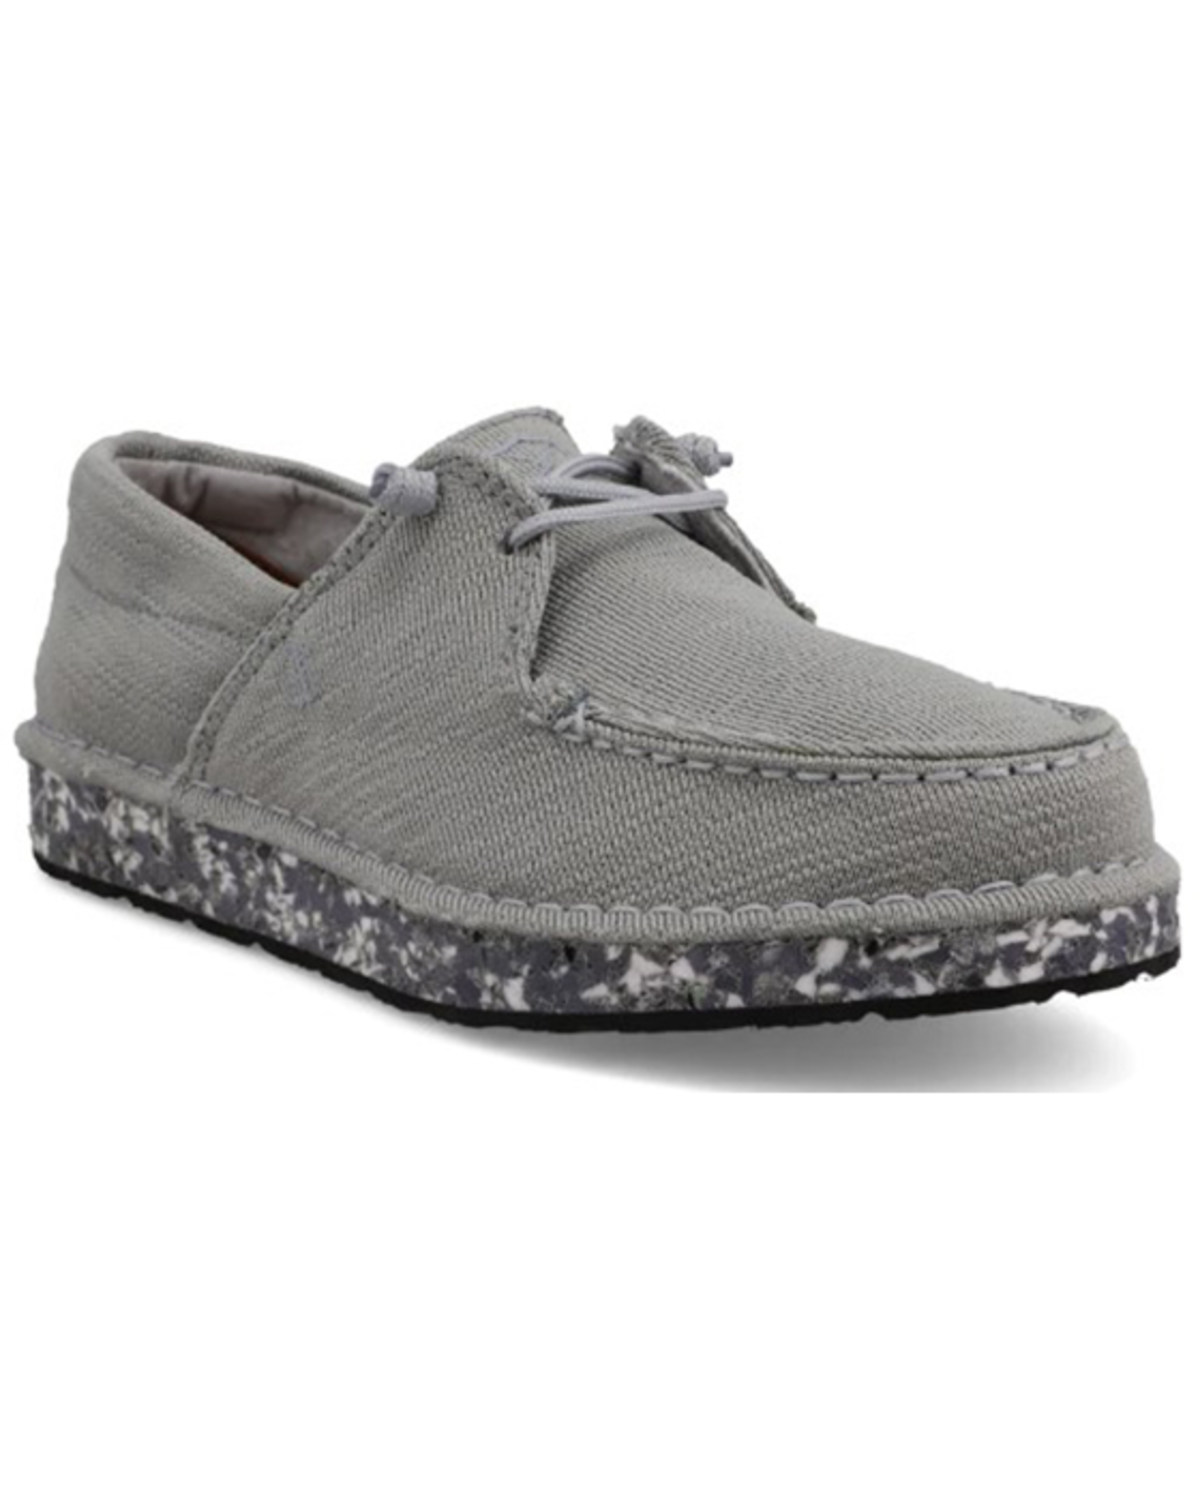 Twisted X Women's Circular Project™ Boat Shoes - Moc Toe